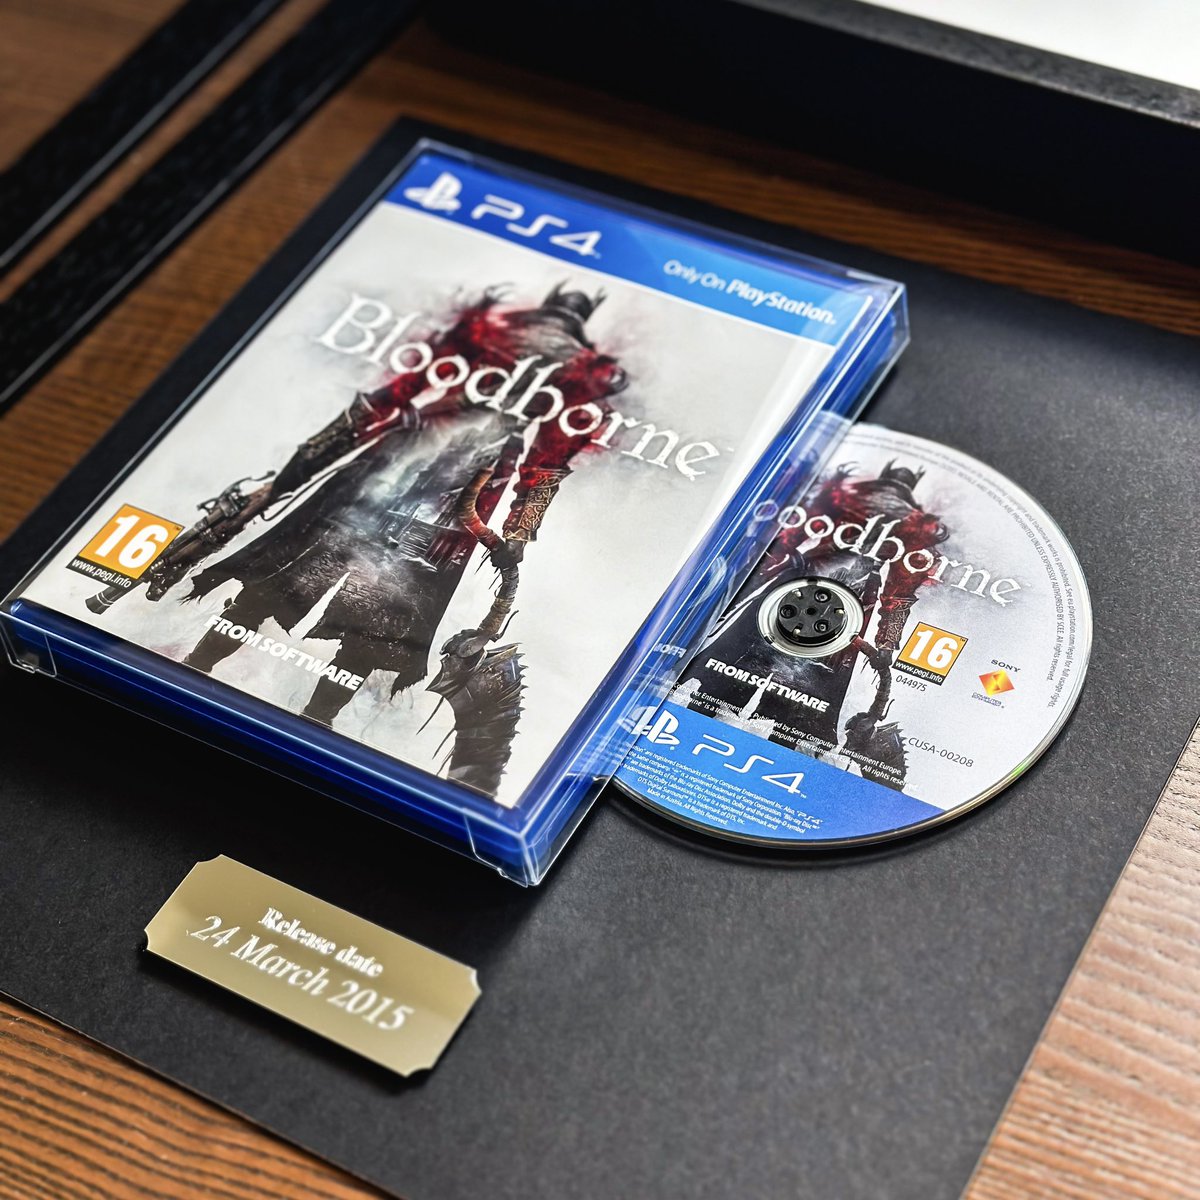 What’s your one-word review of Bloodborne? 👀